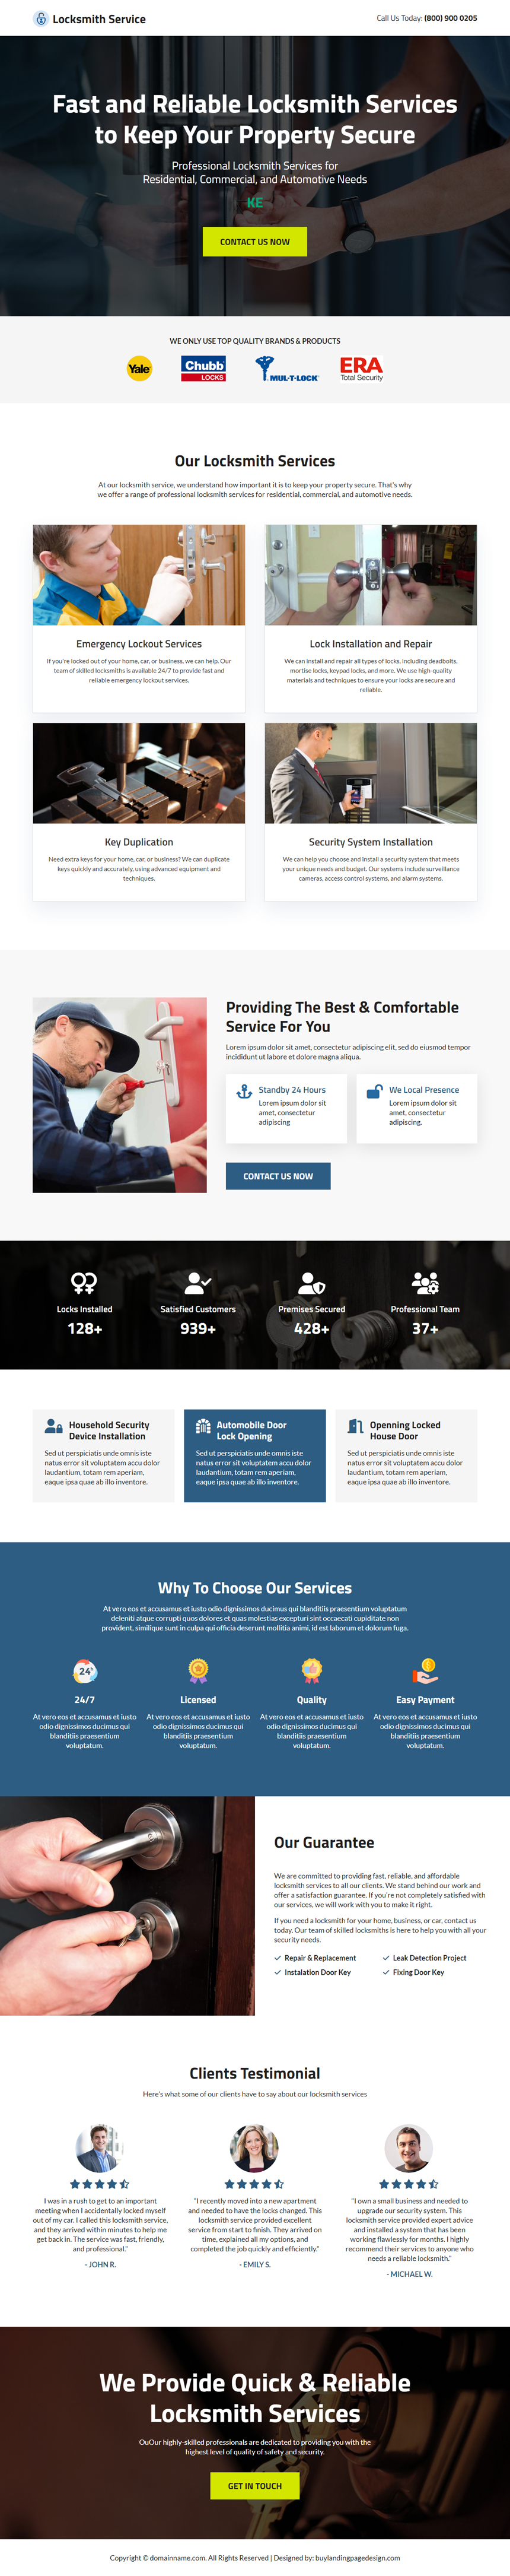 fast and reliable locksmith service responsive landing page